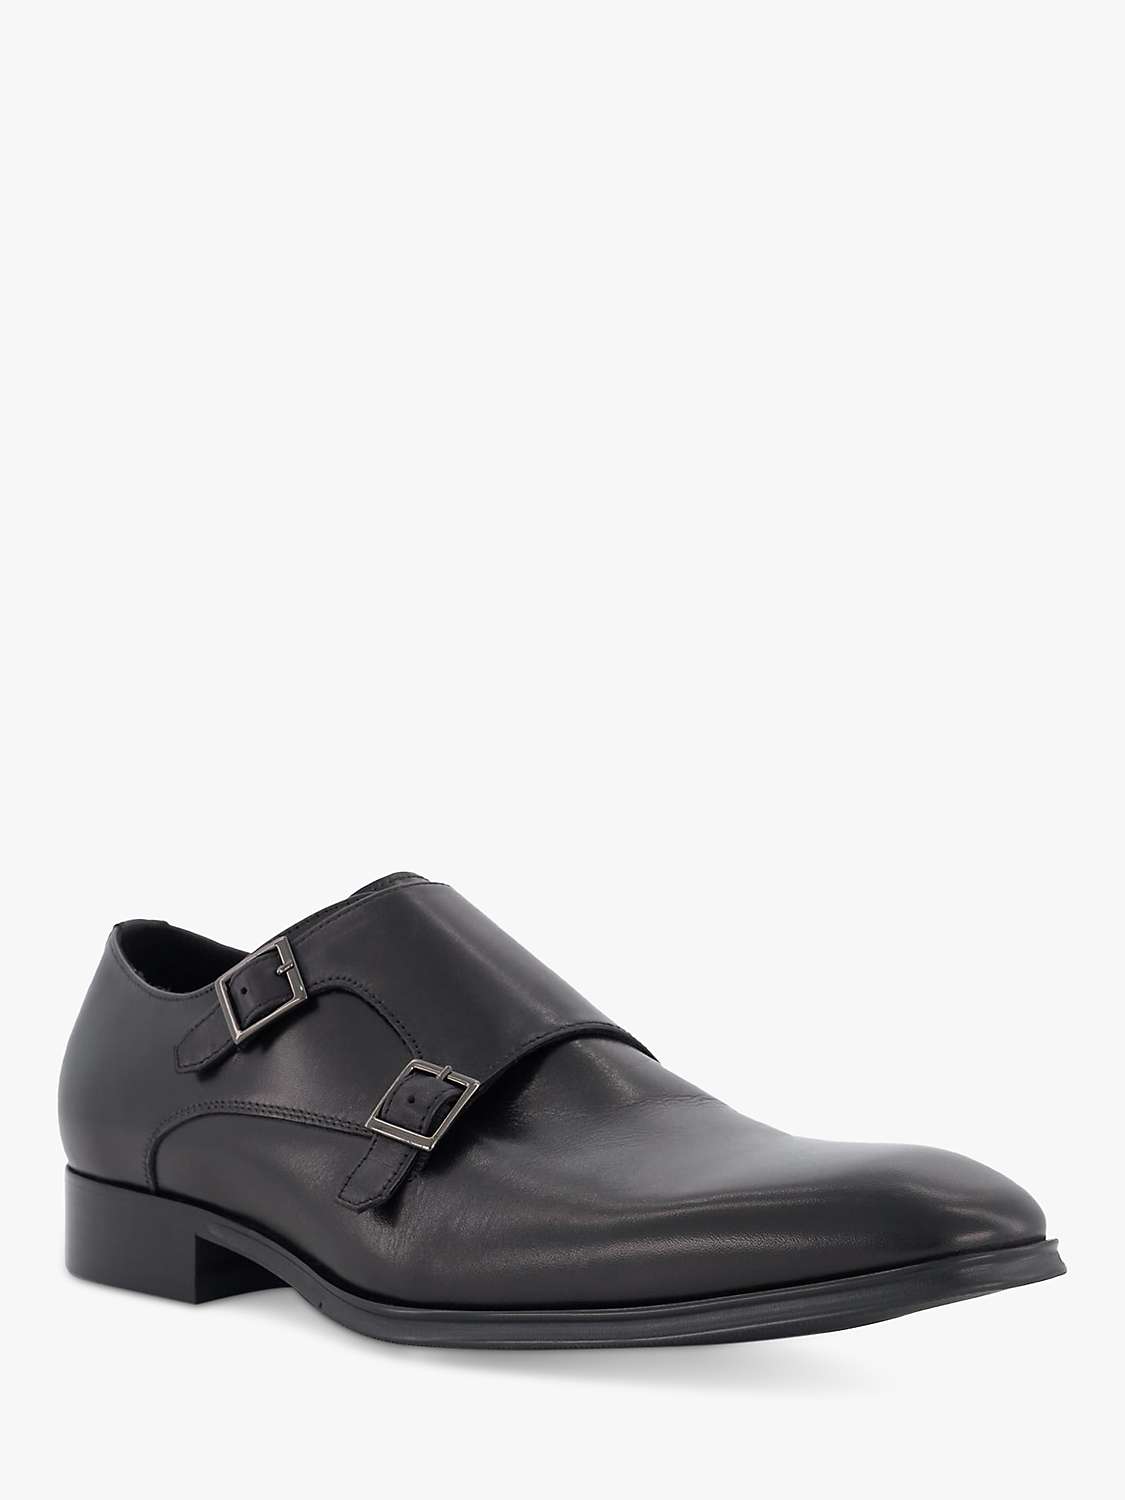 Buy Dune Situation Double Strap Leather Monk Shoes, Black Online at johnlewis.com